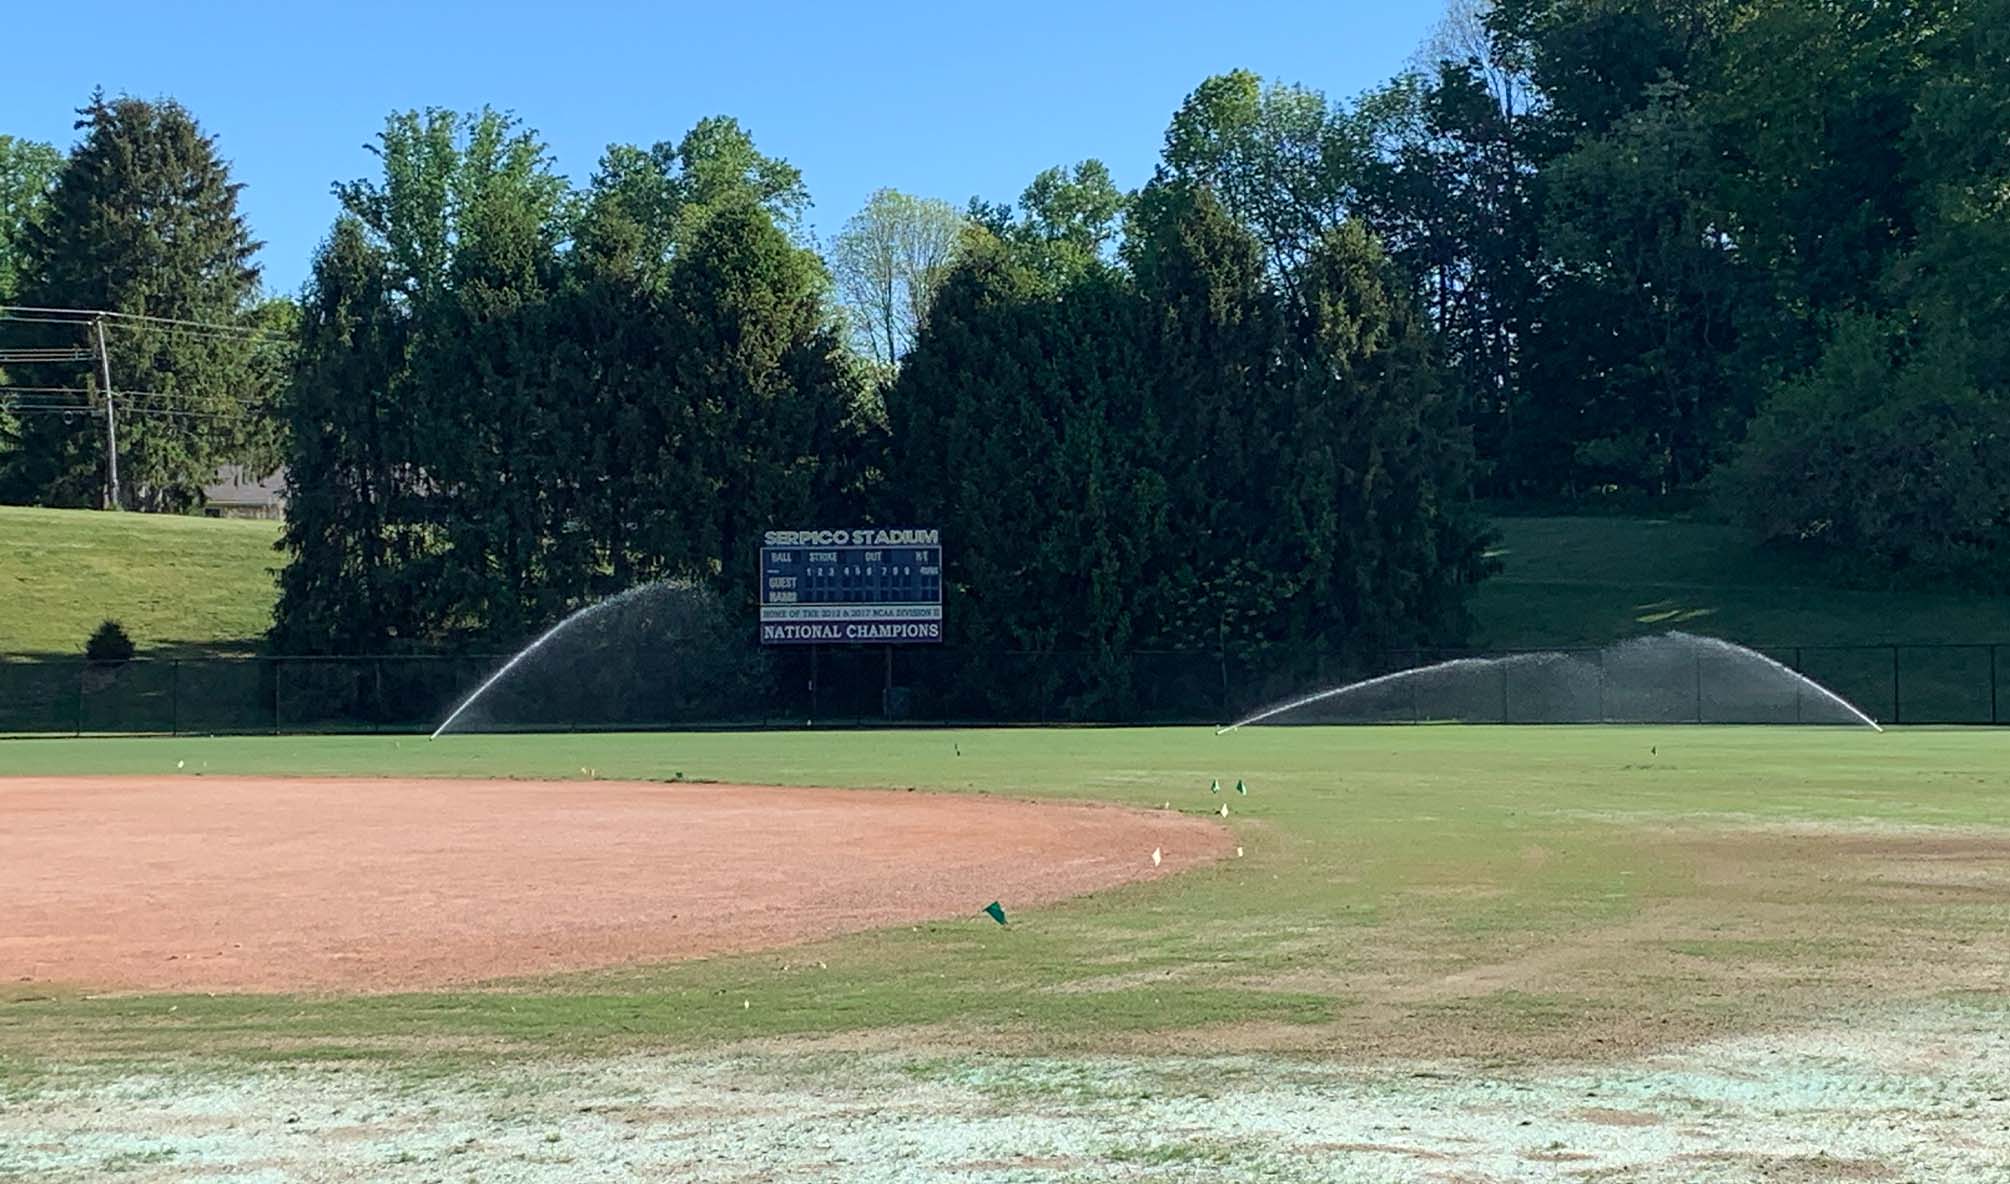 Commercial Sprinklers Set Up On A Baseball Field